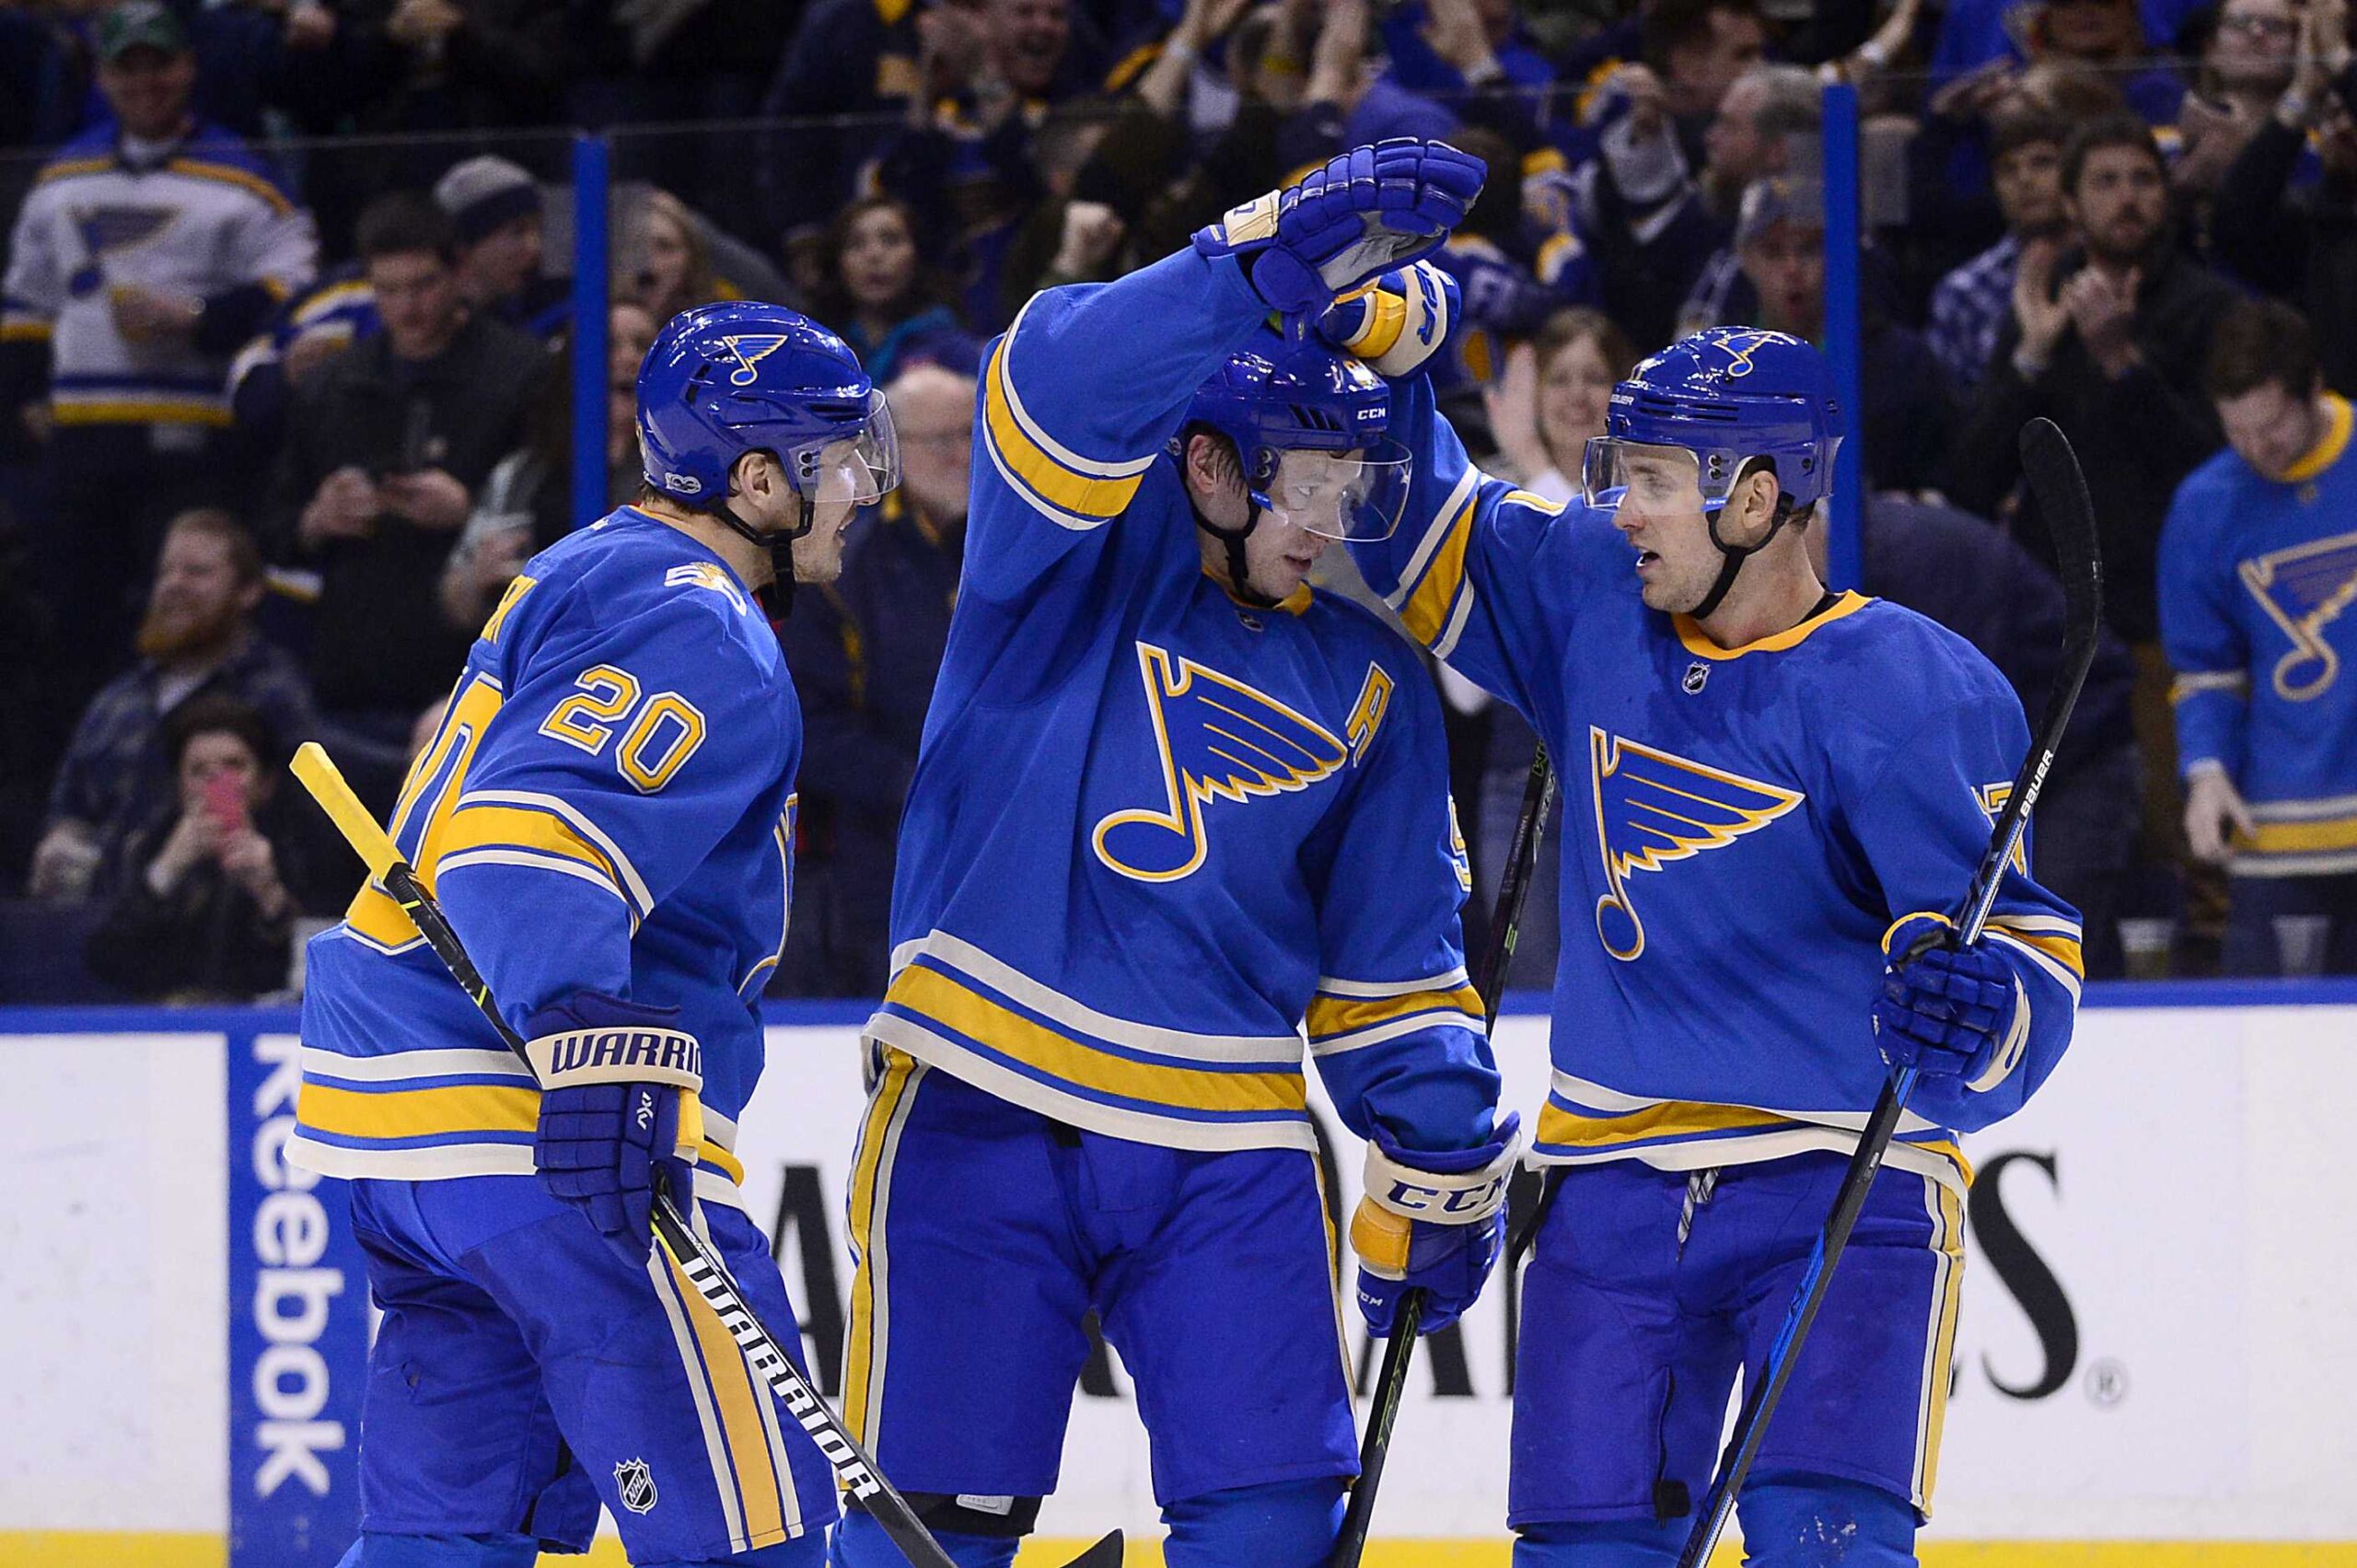  St. Louis: The Not-So-Blues Have Claimed 10 Straight